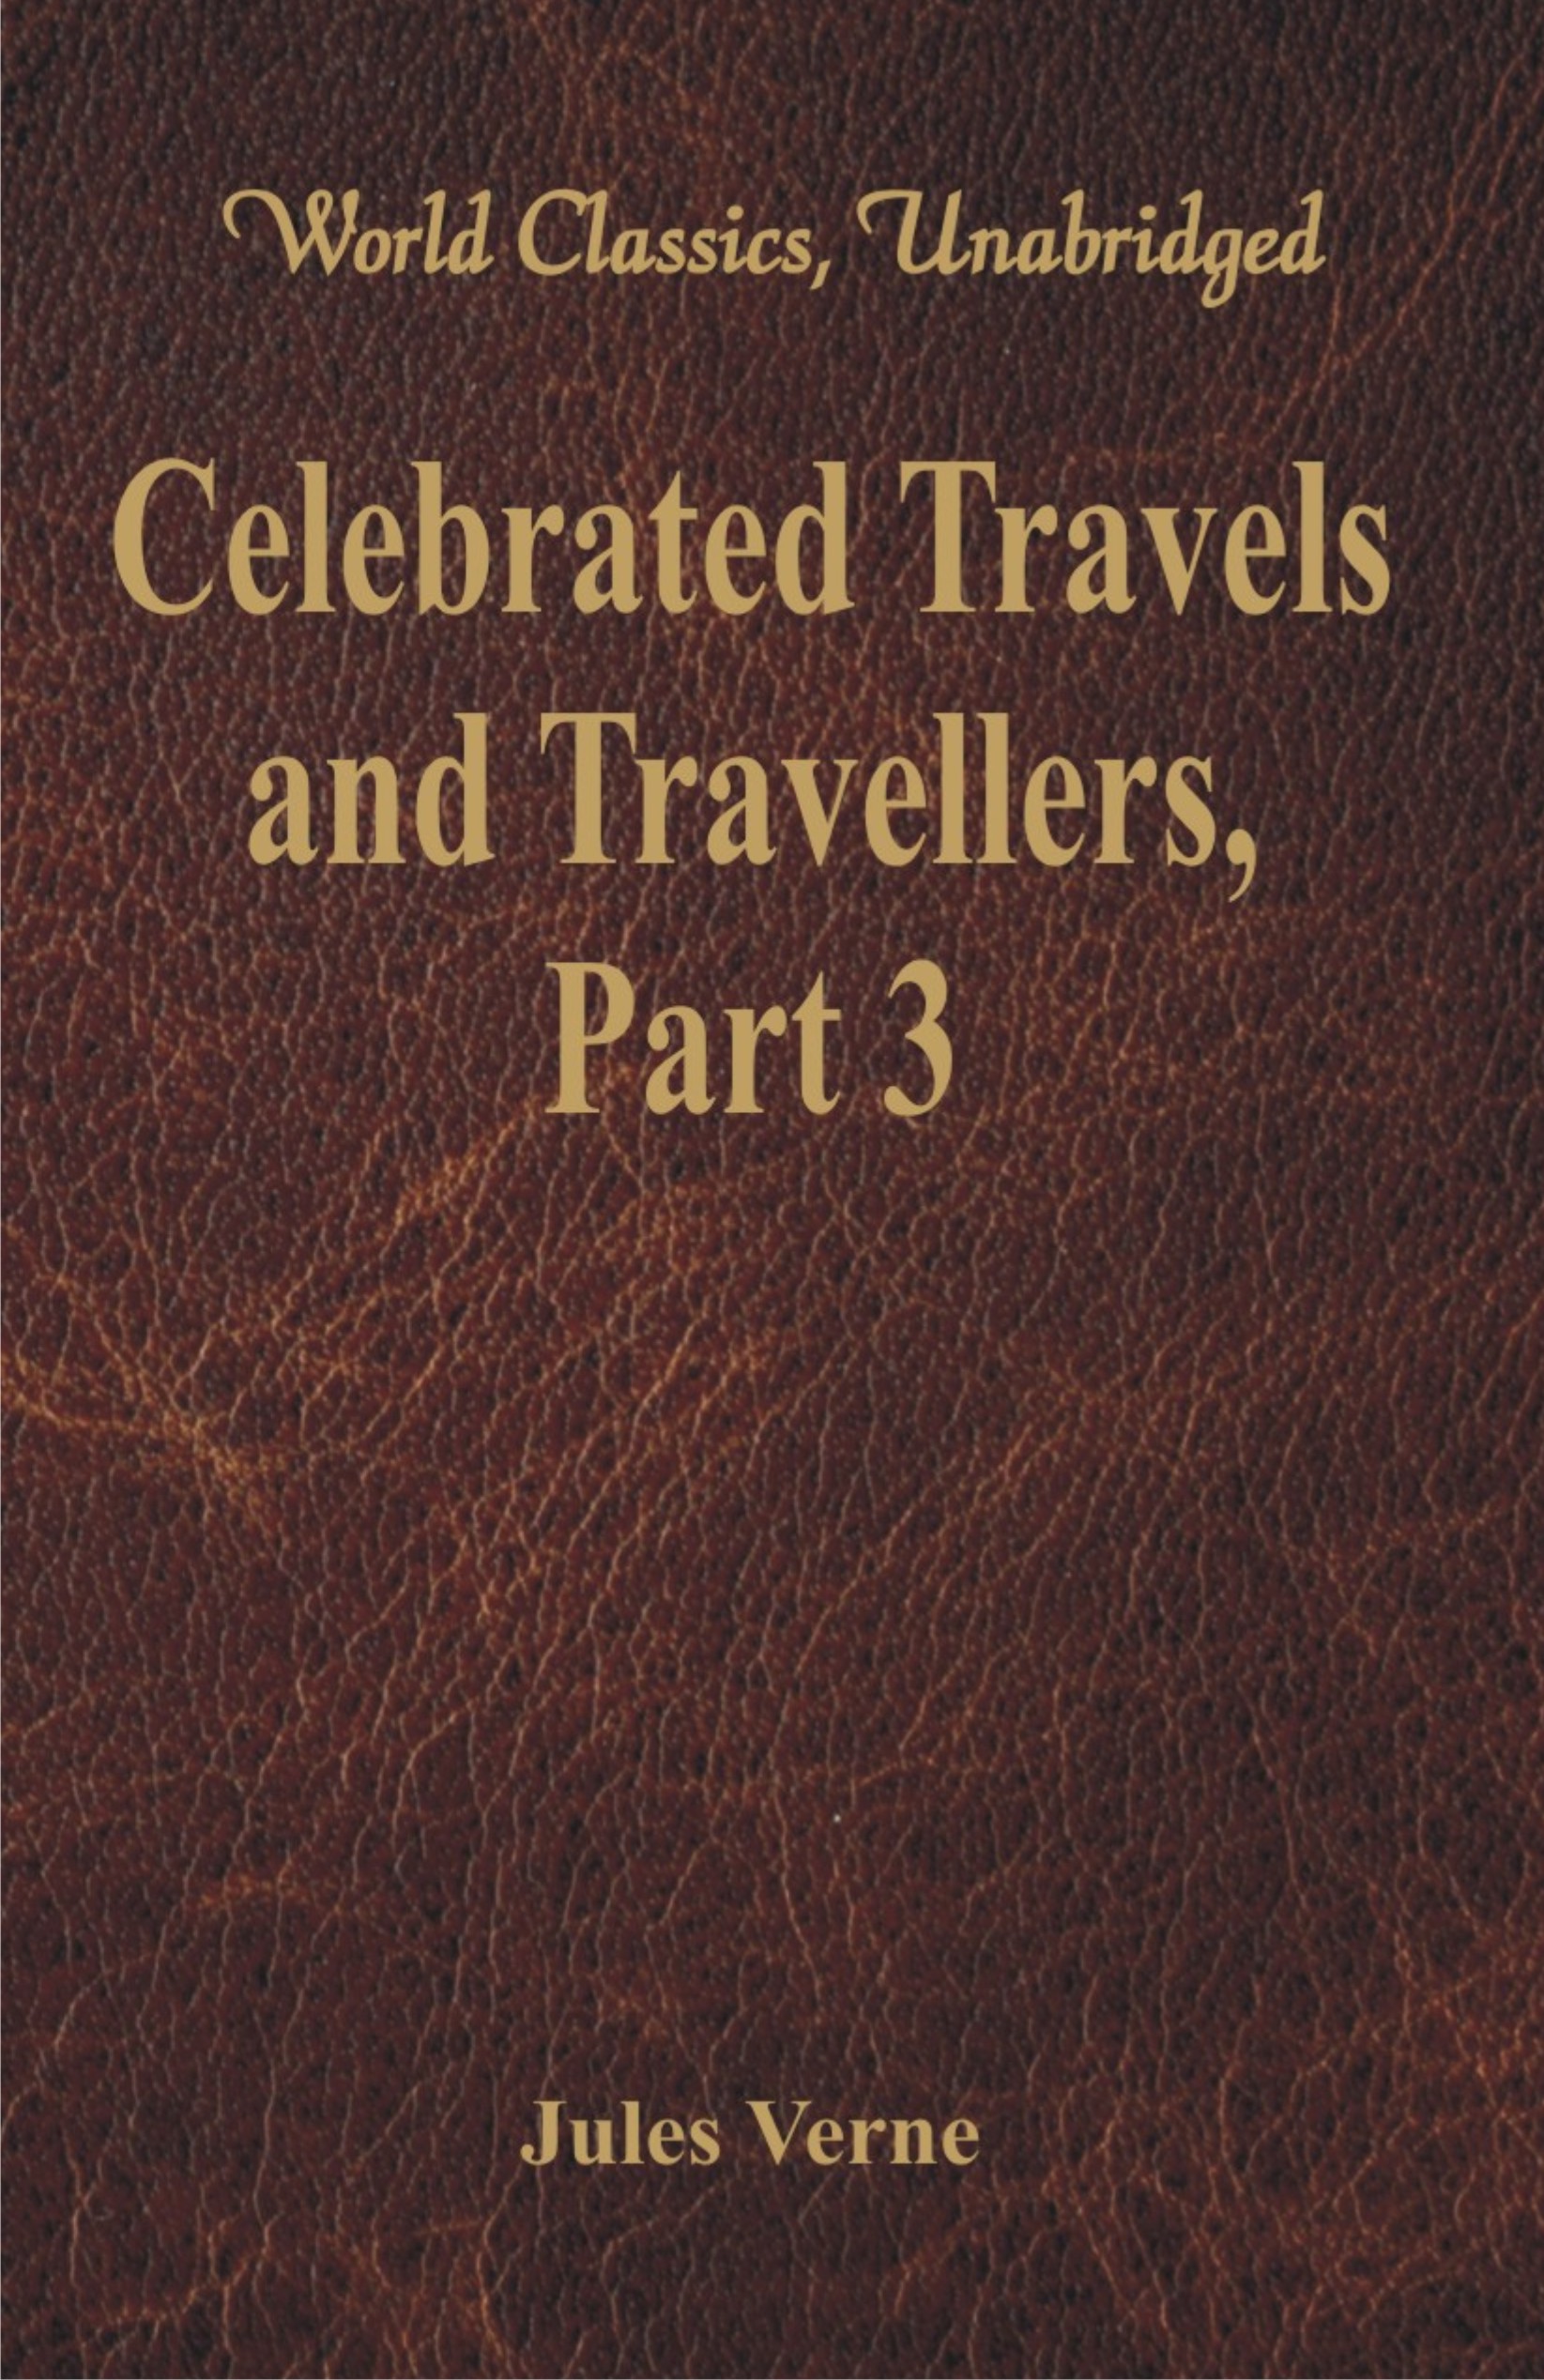 Celebrated Travels and Travellers: The Great Explorers of the Nineteenth Century - Part 3 (World Cla